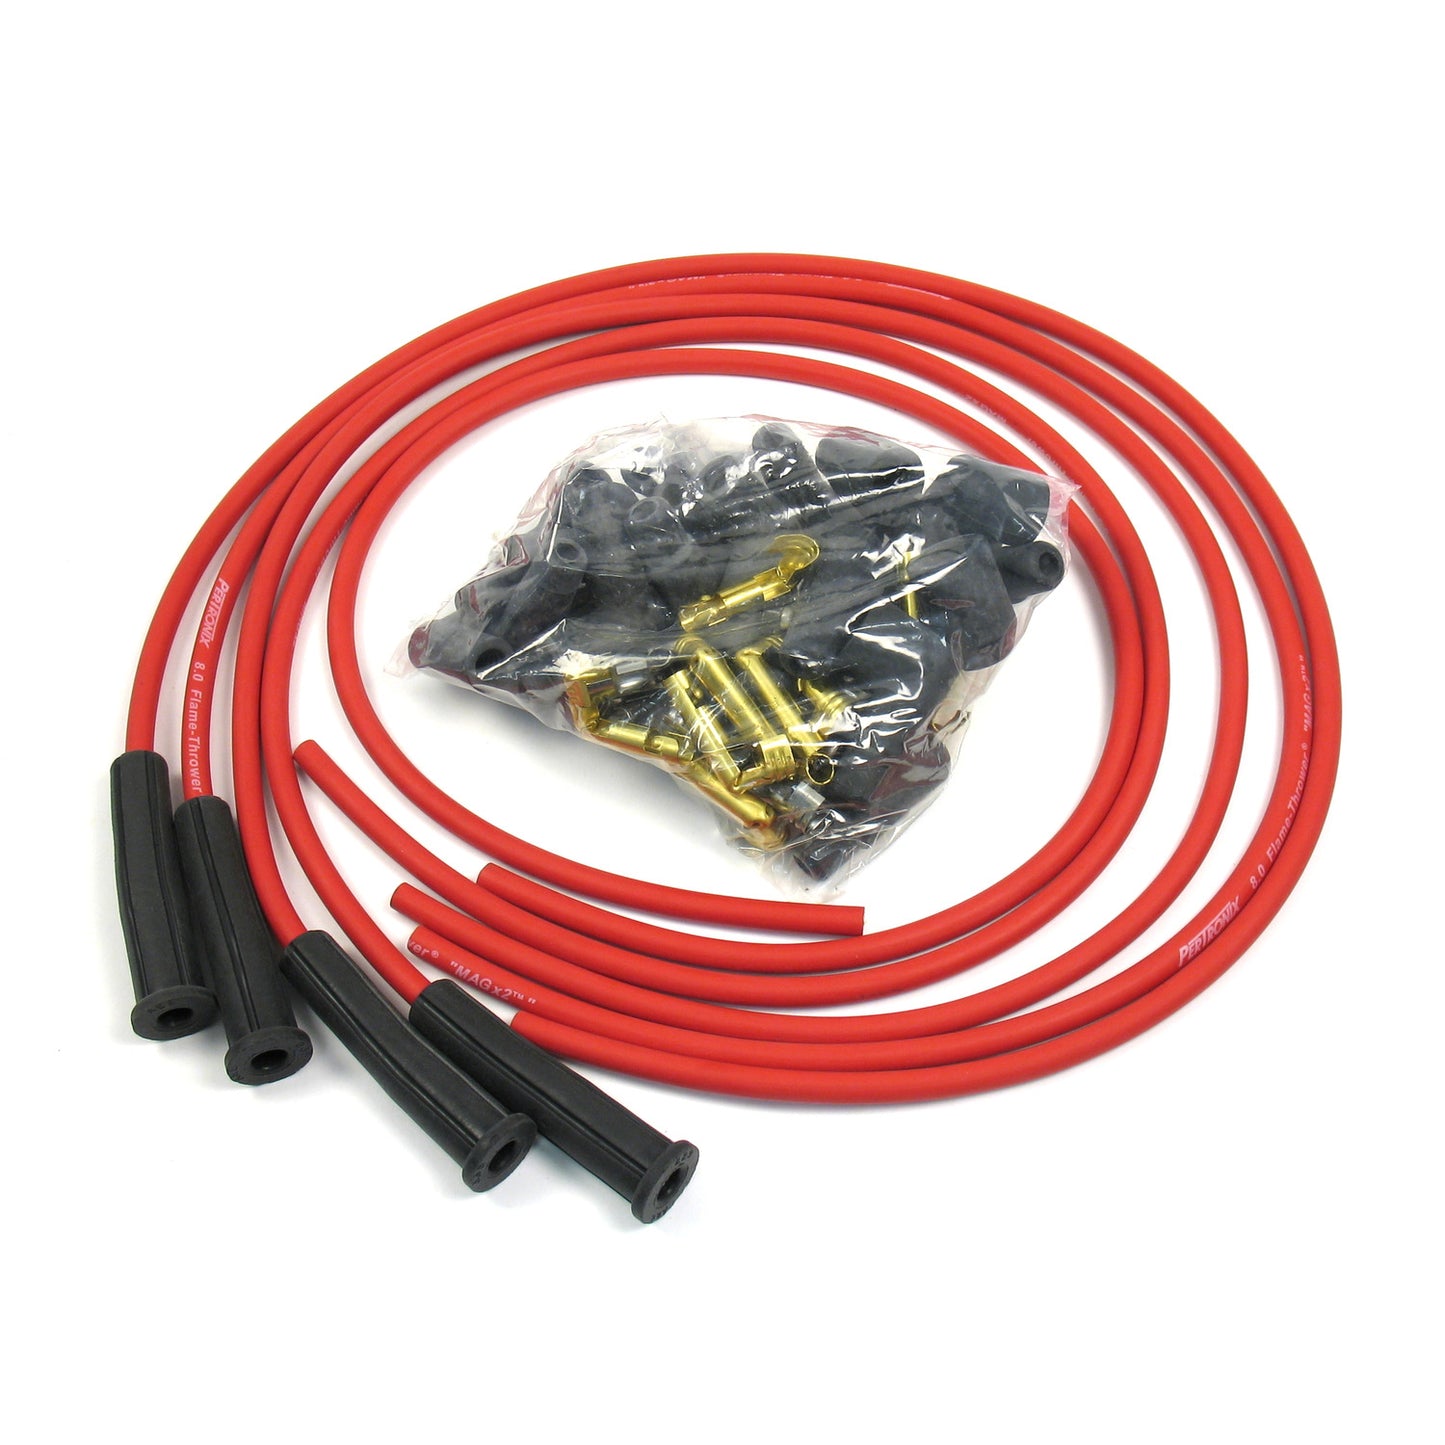 PerTronix 8044VW Flame-Thrower Spark Plug Wires 4 cyl 8mm VW Universal 180 Degree Red